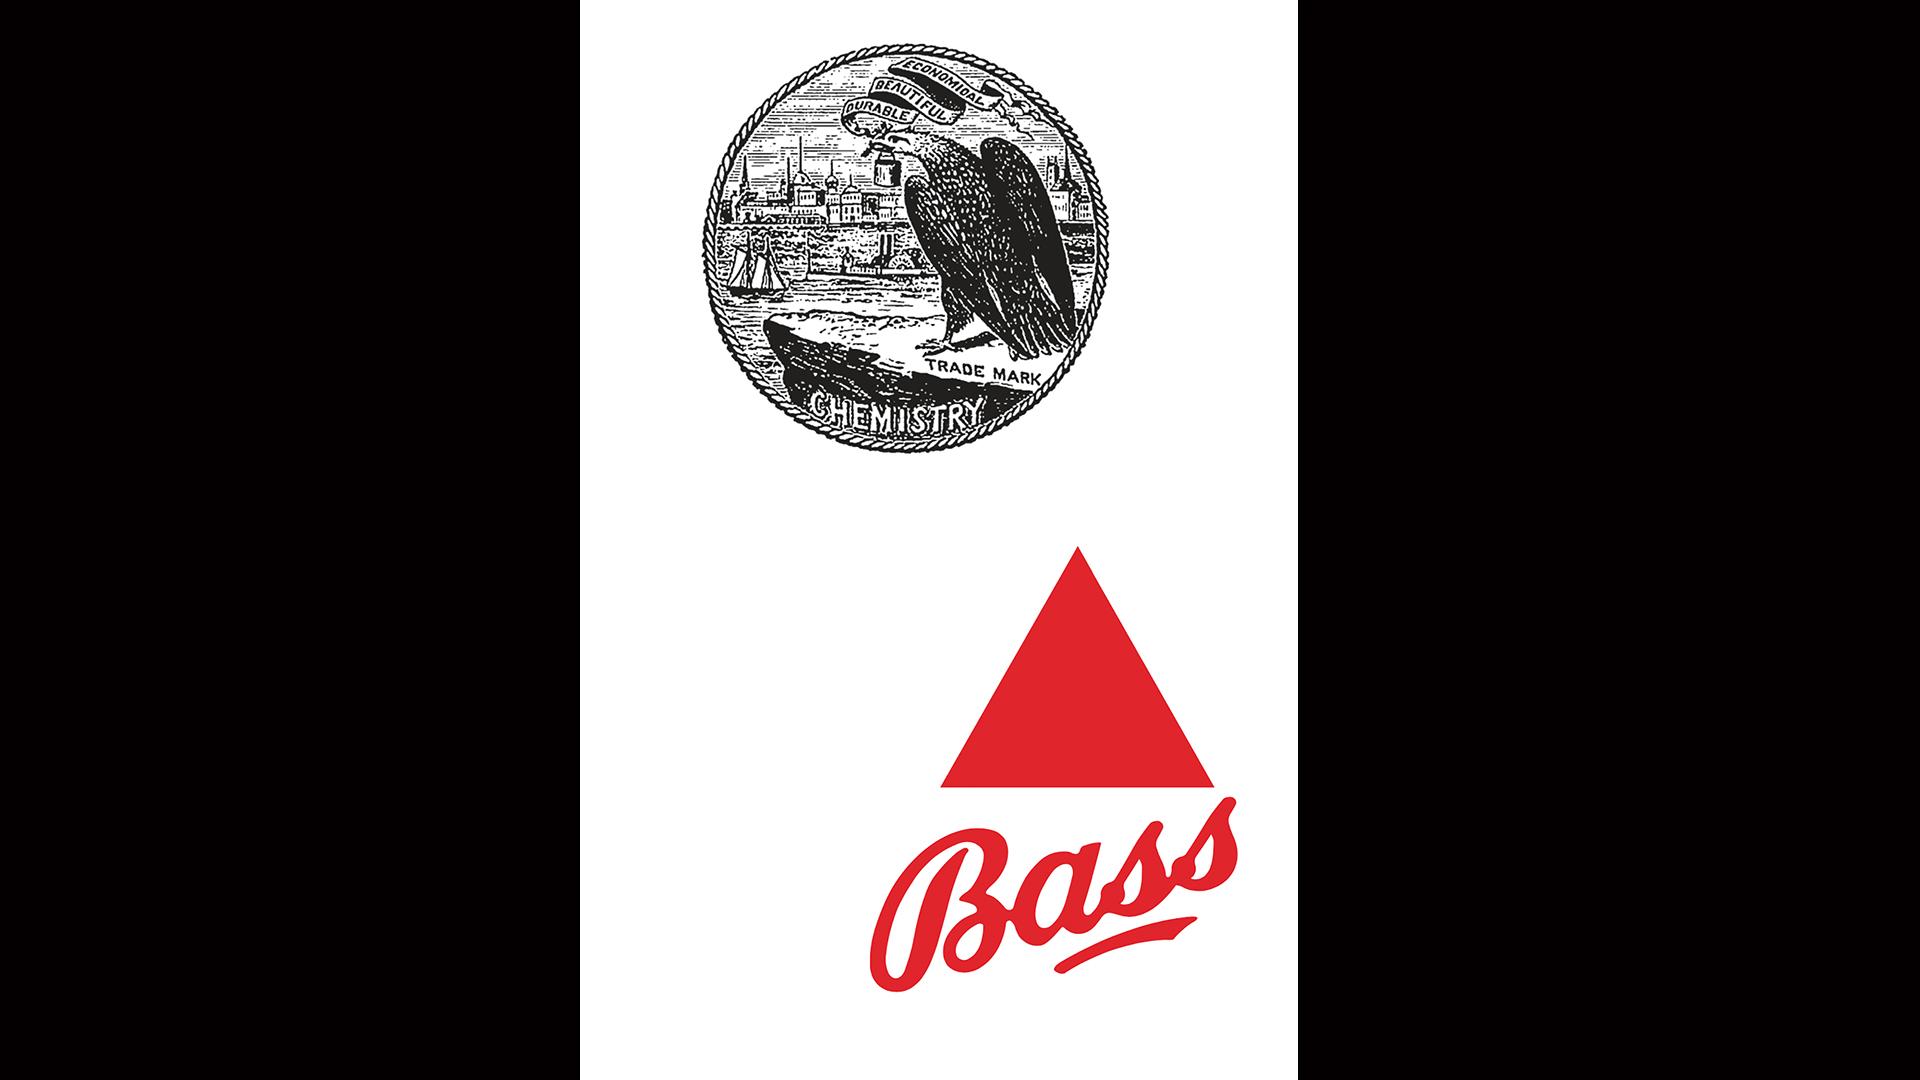 The original logo for paint manufacturer Averill (top) was the first trademark filed in the U.S., in 1970. British beer producer Bass filed the first European one in 1875, and the red triangle it contained is still found in the current logo (bottom). (Courtesy of Taschen)